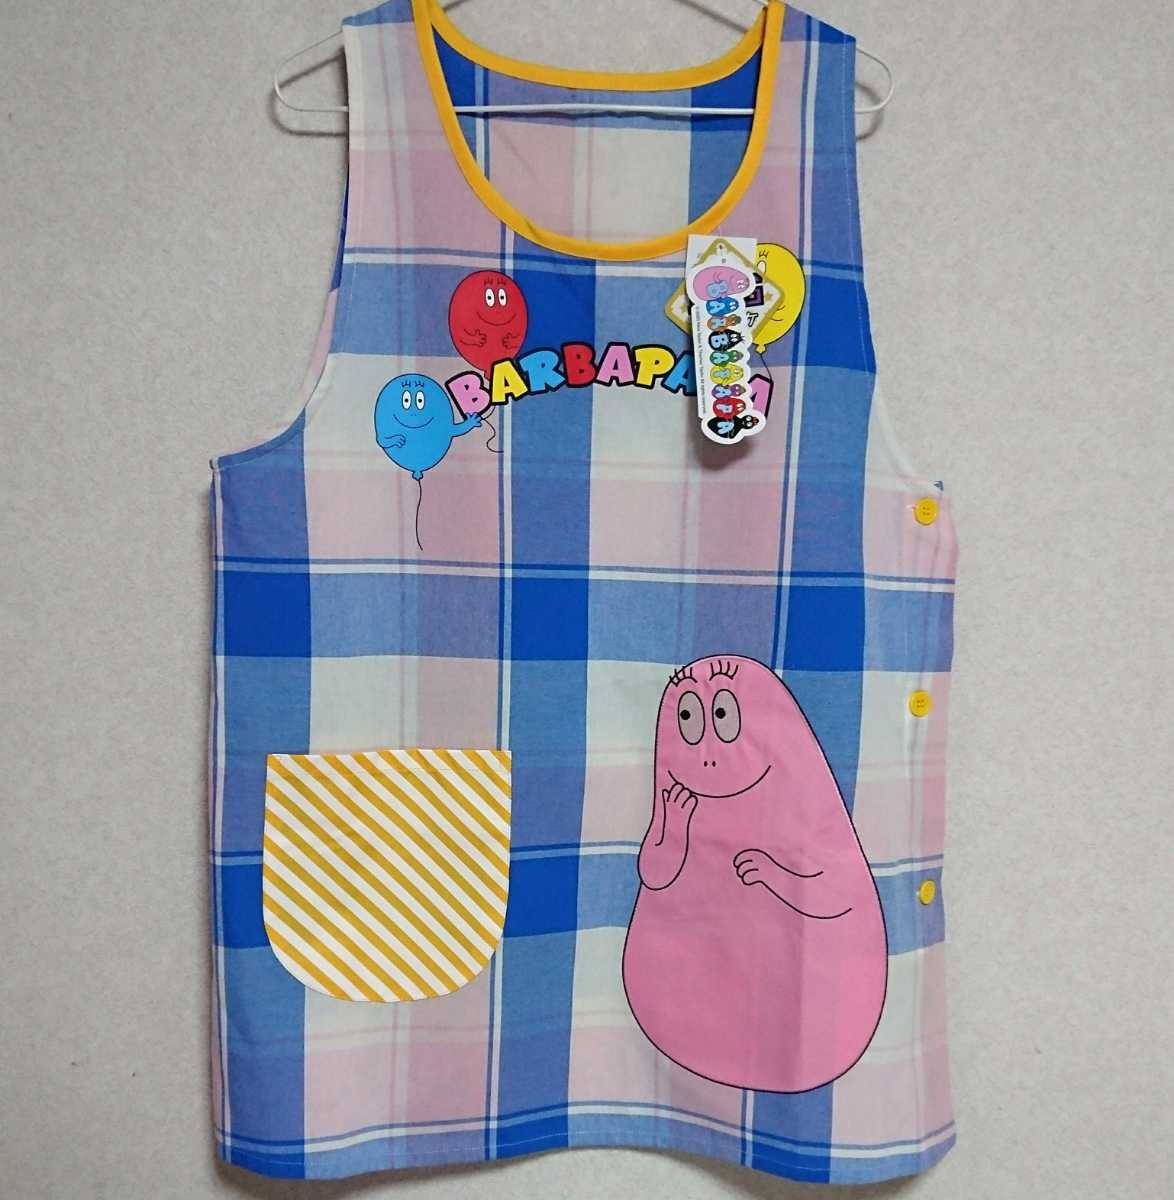  new goods free shipping Barbapapa apron for adult childcare worker nursing .M-L